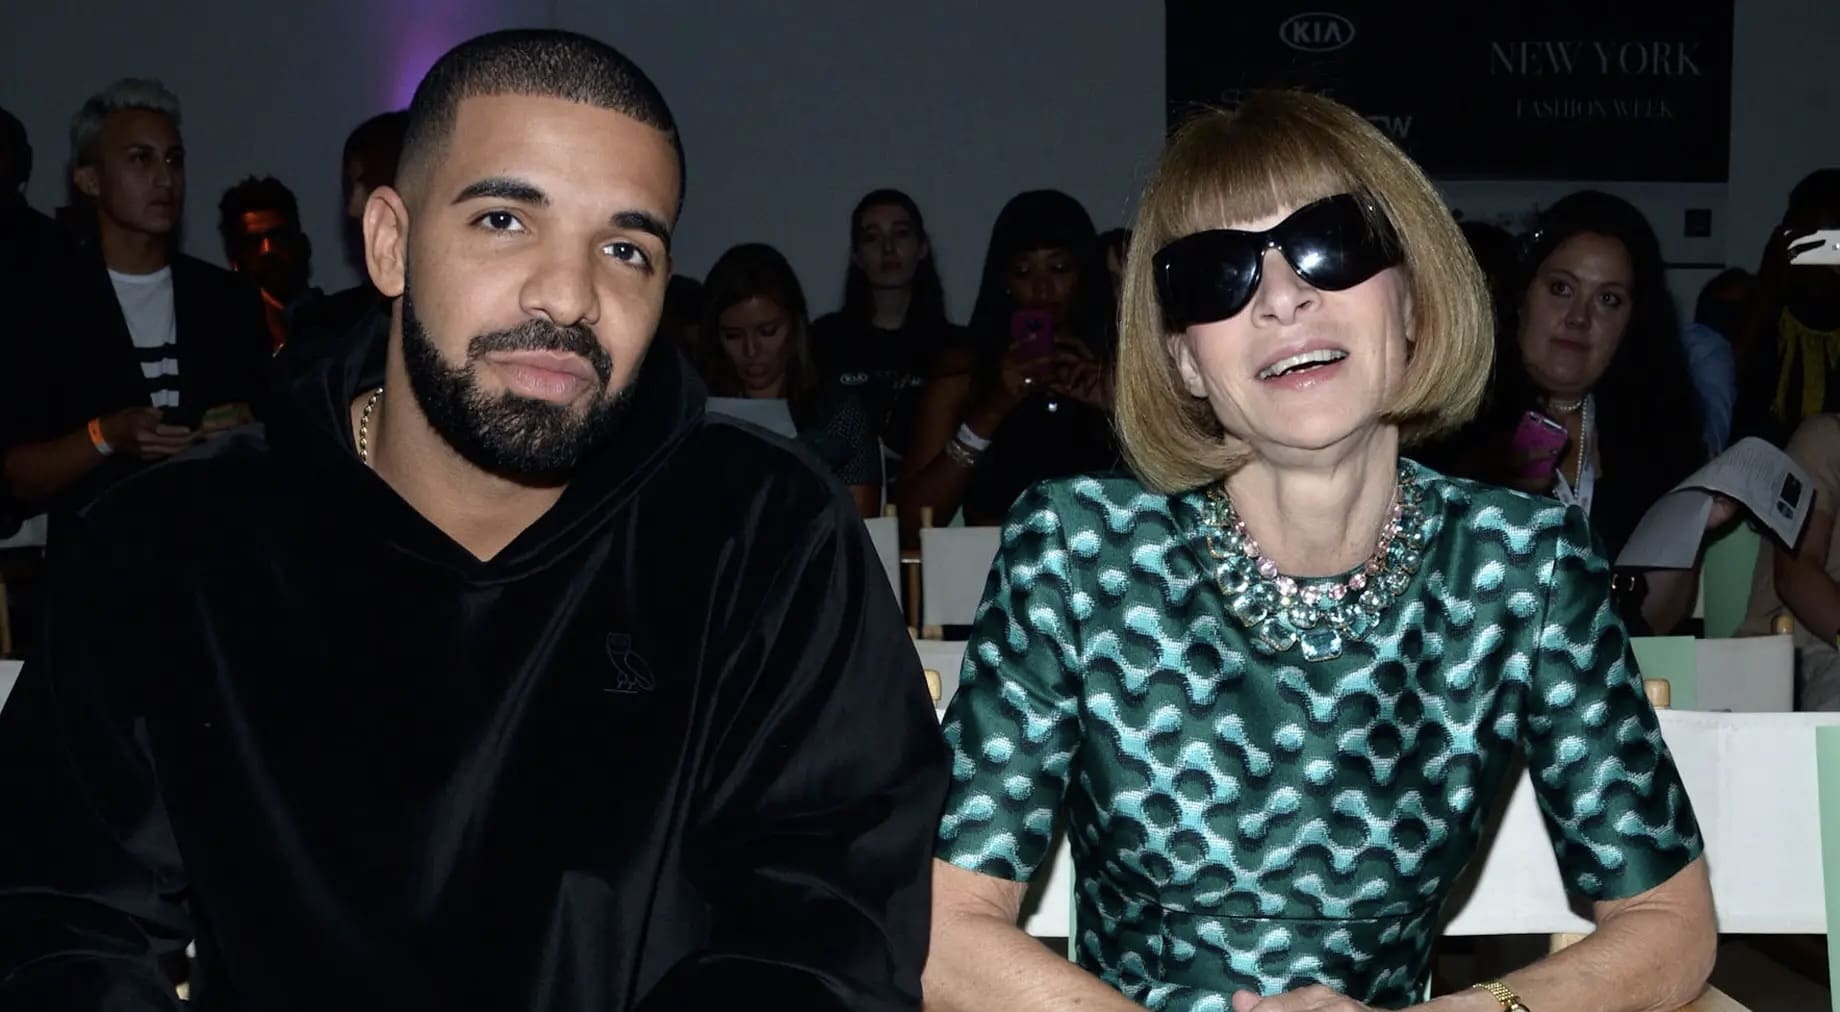 Drake and 21 Savage Troll Anna Wintour With Unflattering AI-Generated Video During Tour Stop [Video]